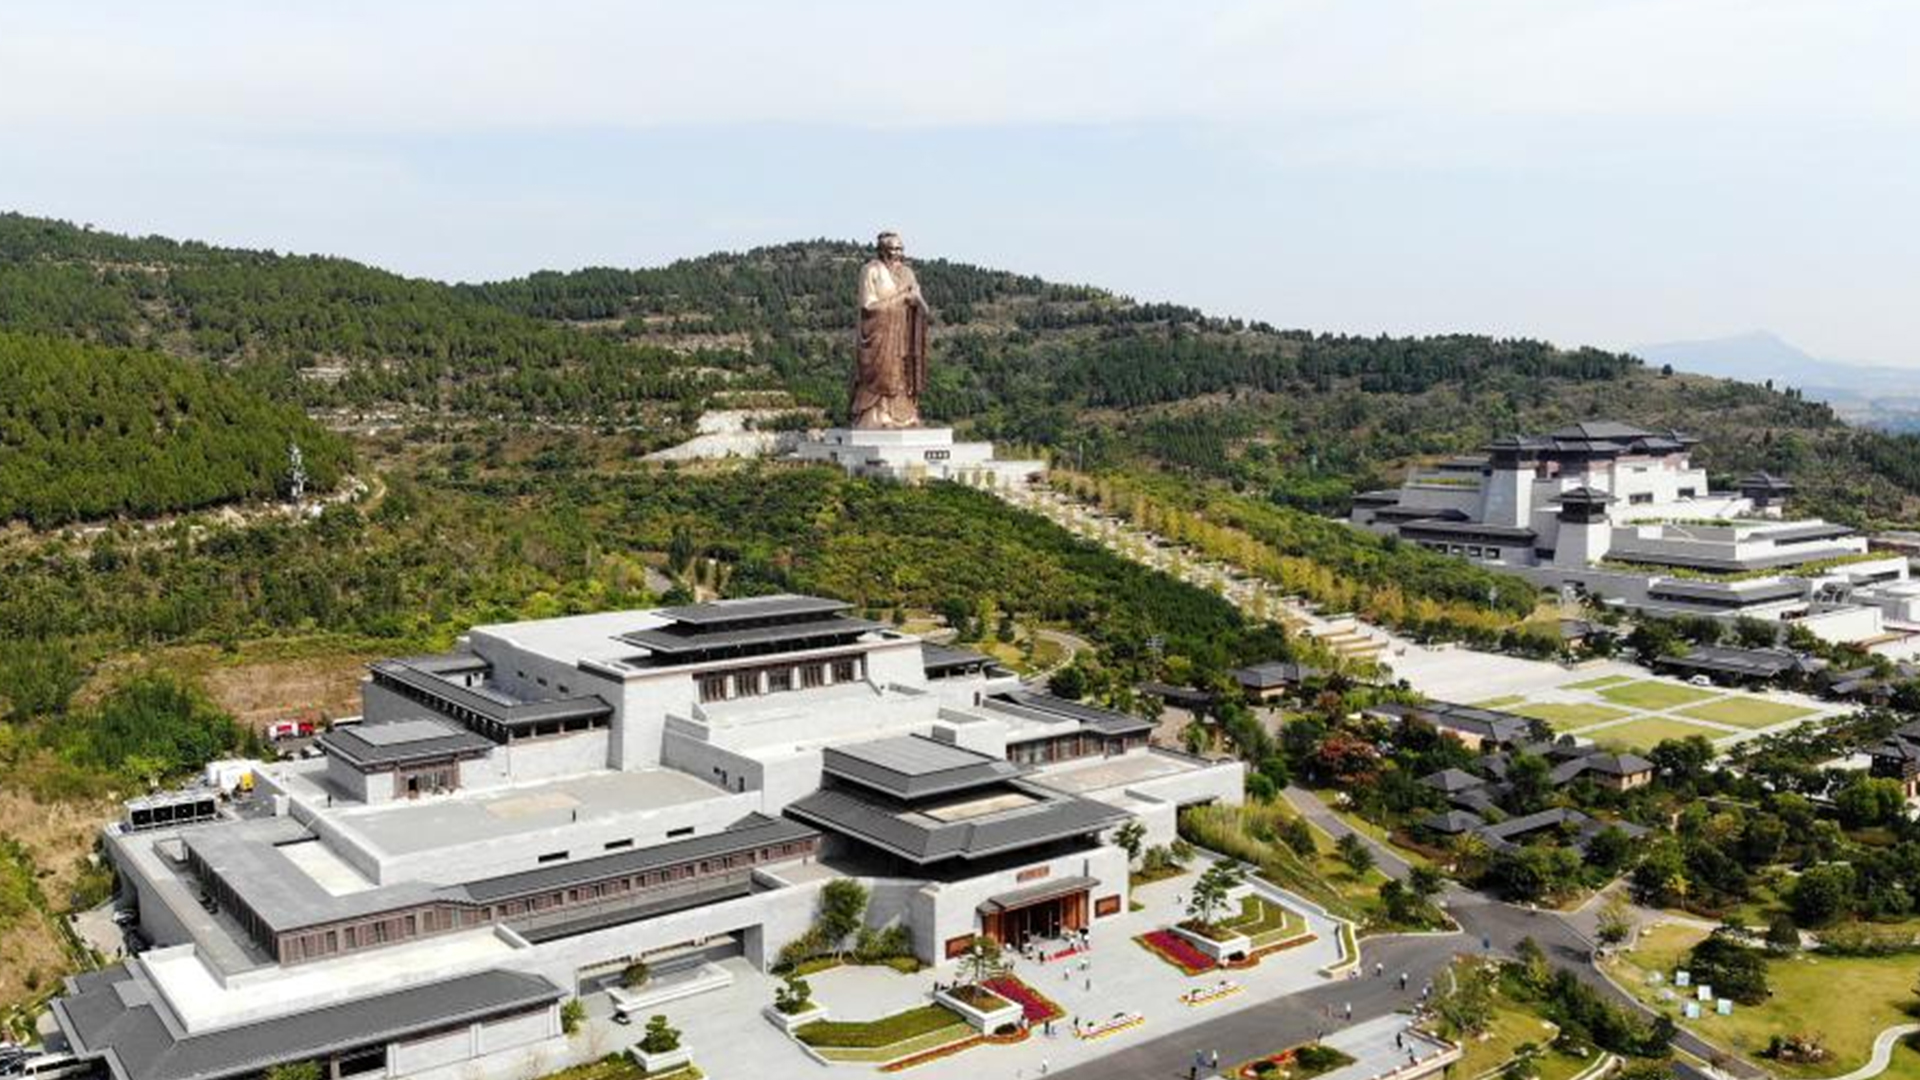 The site of 2022 China (Qufu) International Confucius Cultural Festival and the Eighth Nishan Forum on World Civilizations in Qufu, the birthplace of Confucius, in east China's Shandong Province, September 27, 2022. /Xinhua